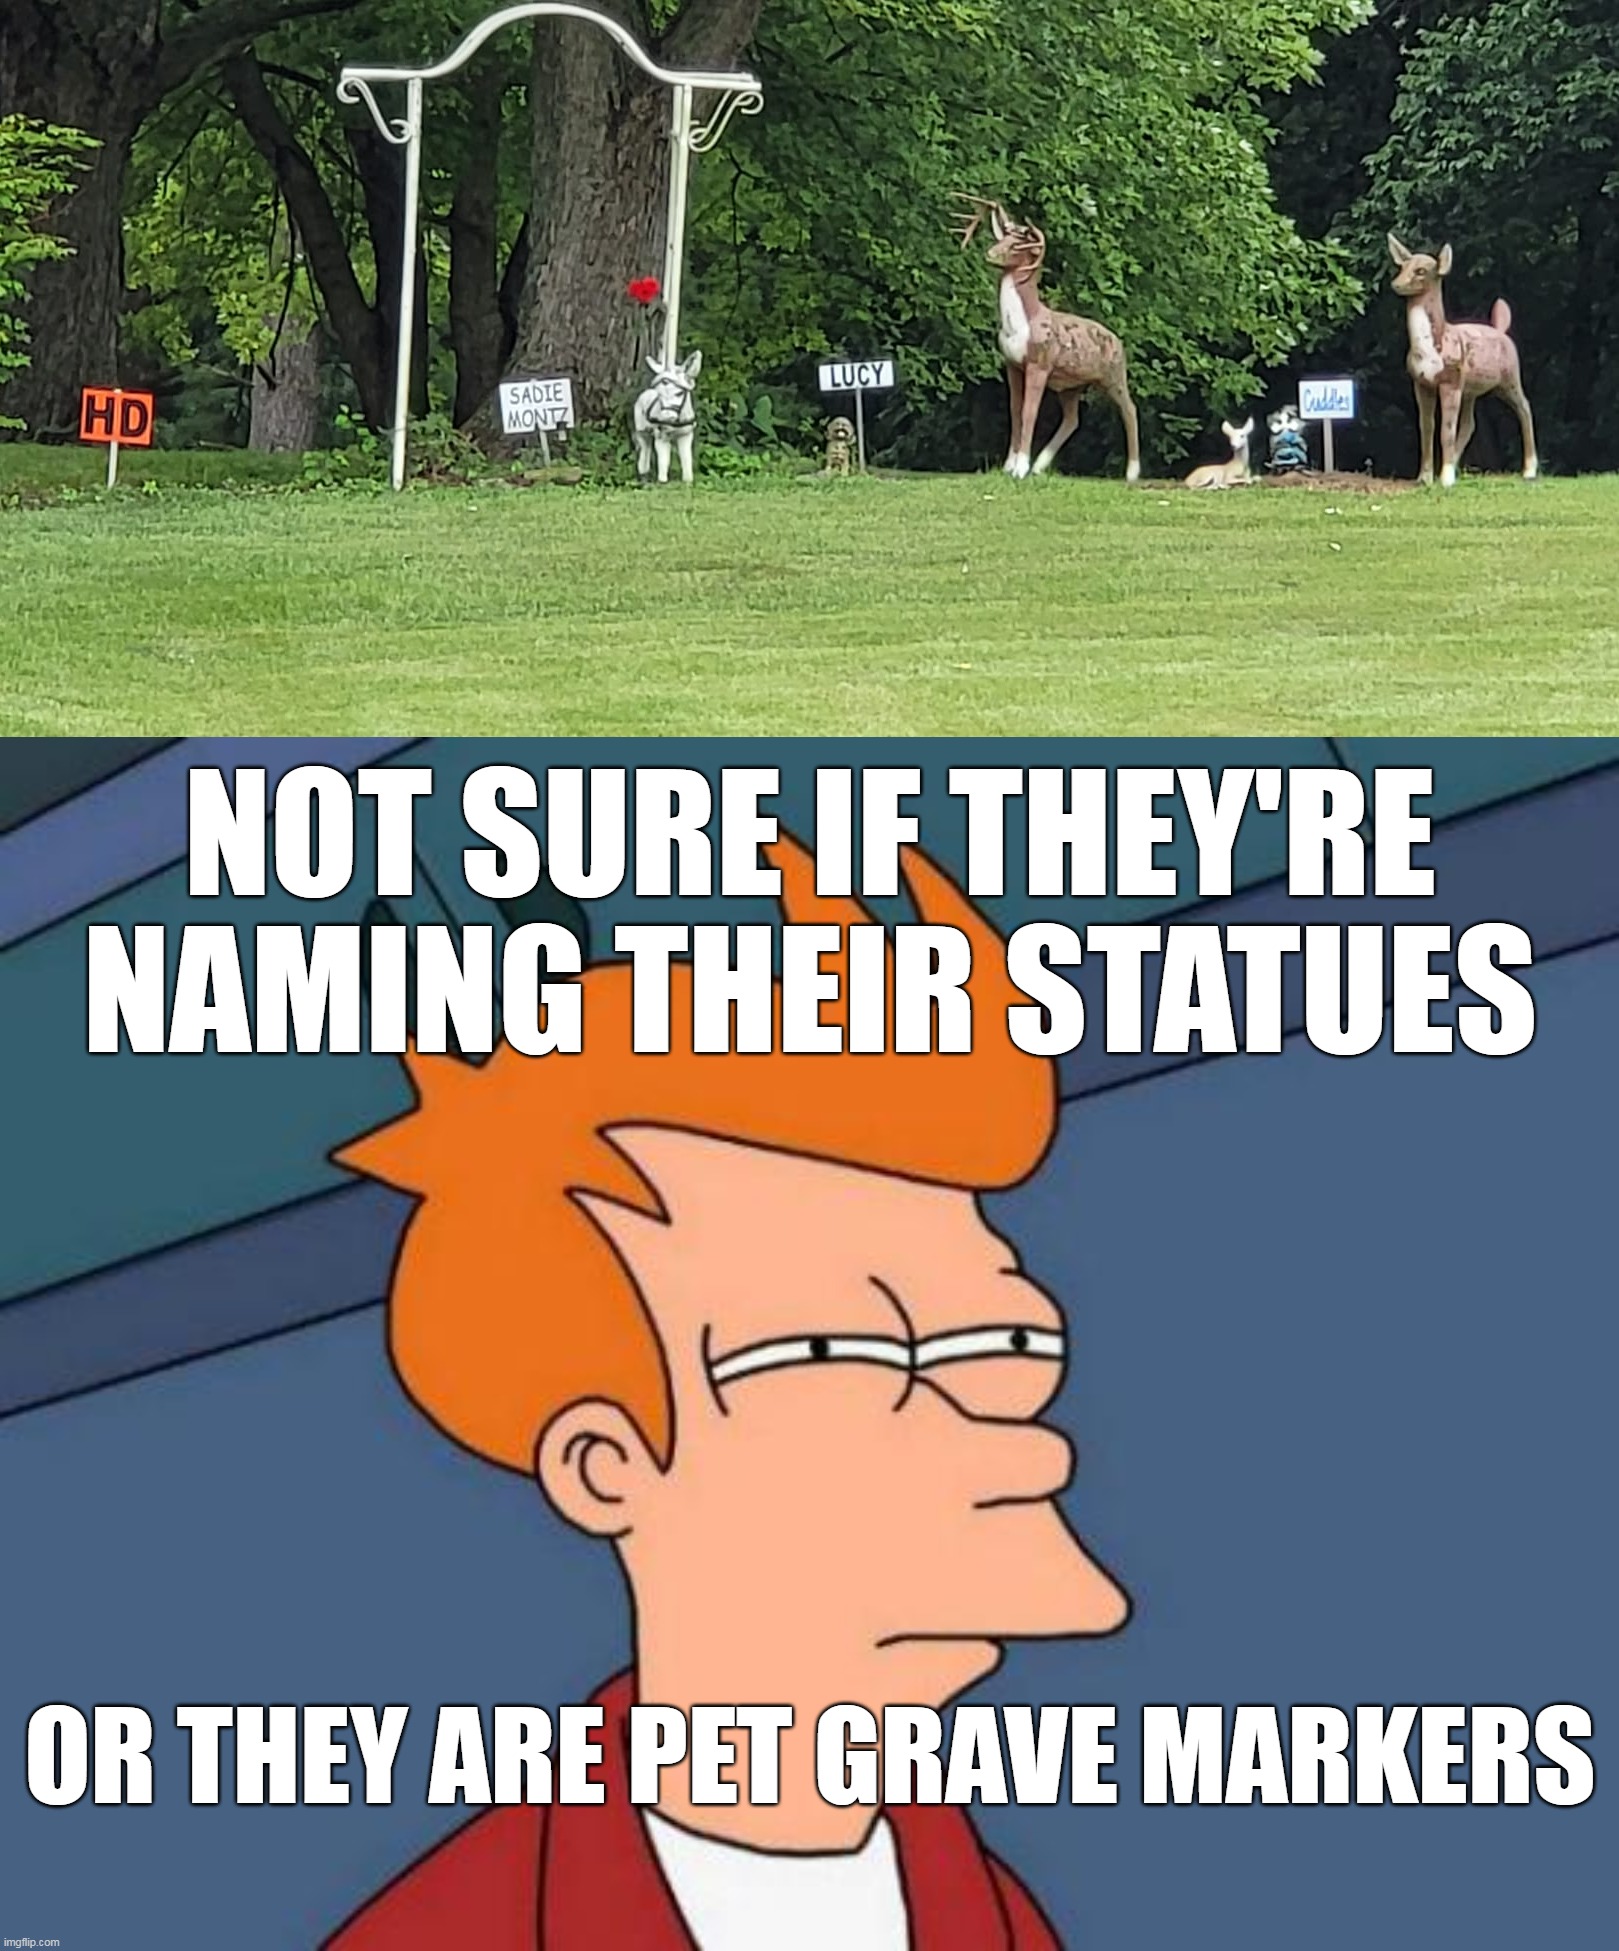 Creepy AF from a Distance | NOT SURE IF THEY'RE NAMING THEIR STATUES; OR THEY ARE PET GRAVE MARKERS | image tagged in memes,futurama fry,meme,humor,signs,perspective | made w/ Imgflip meme maker